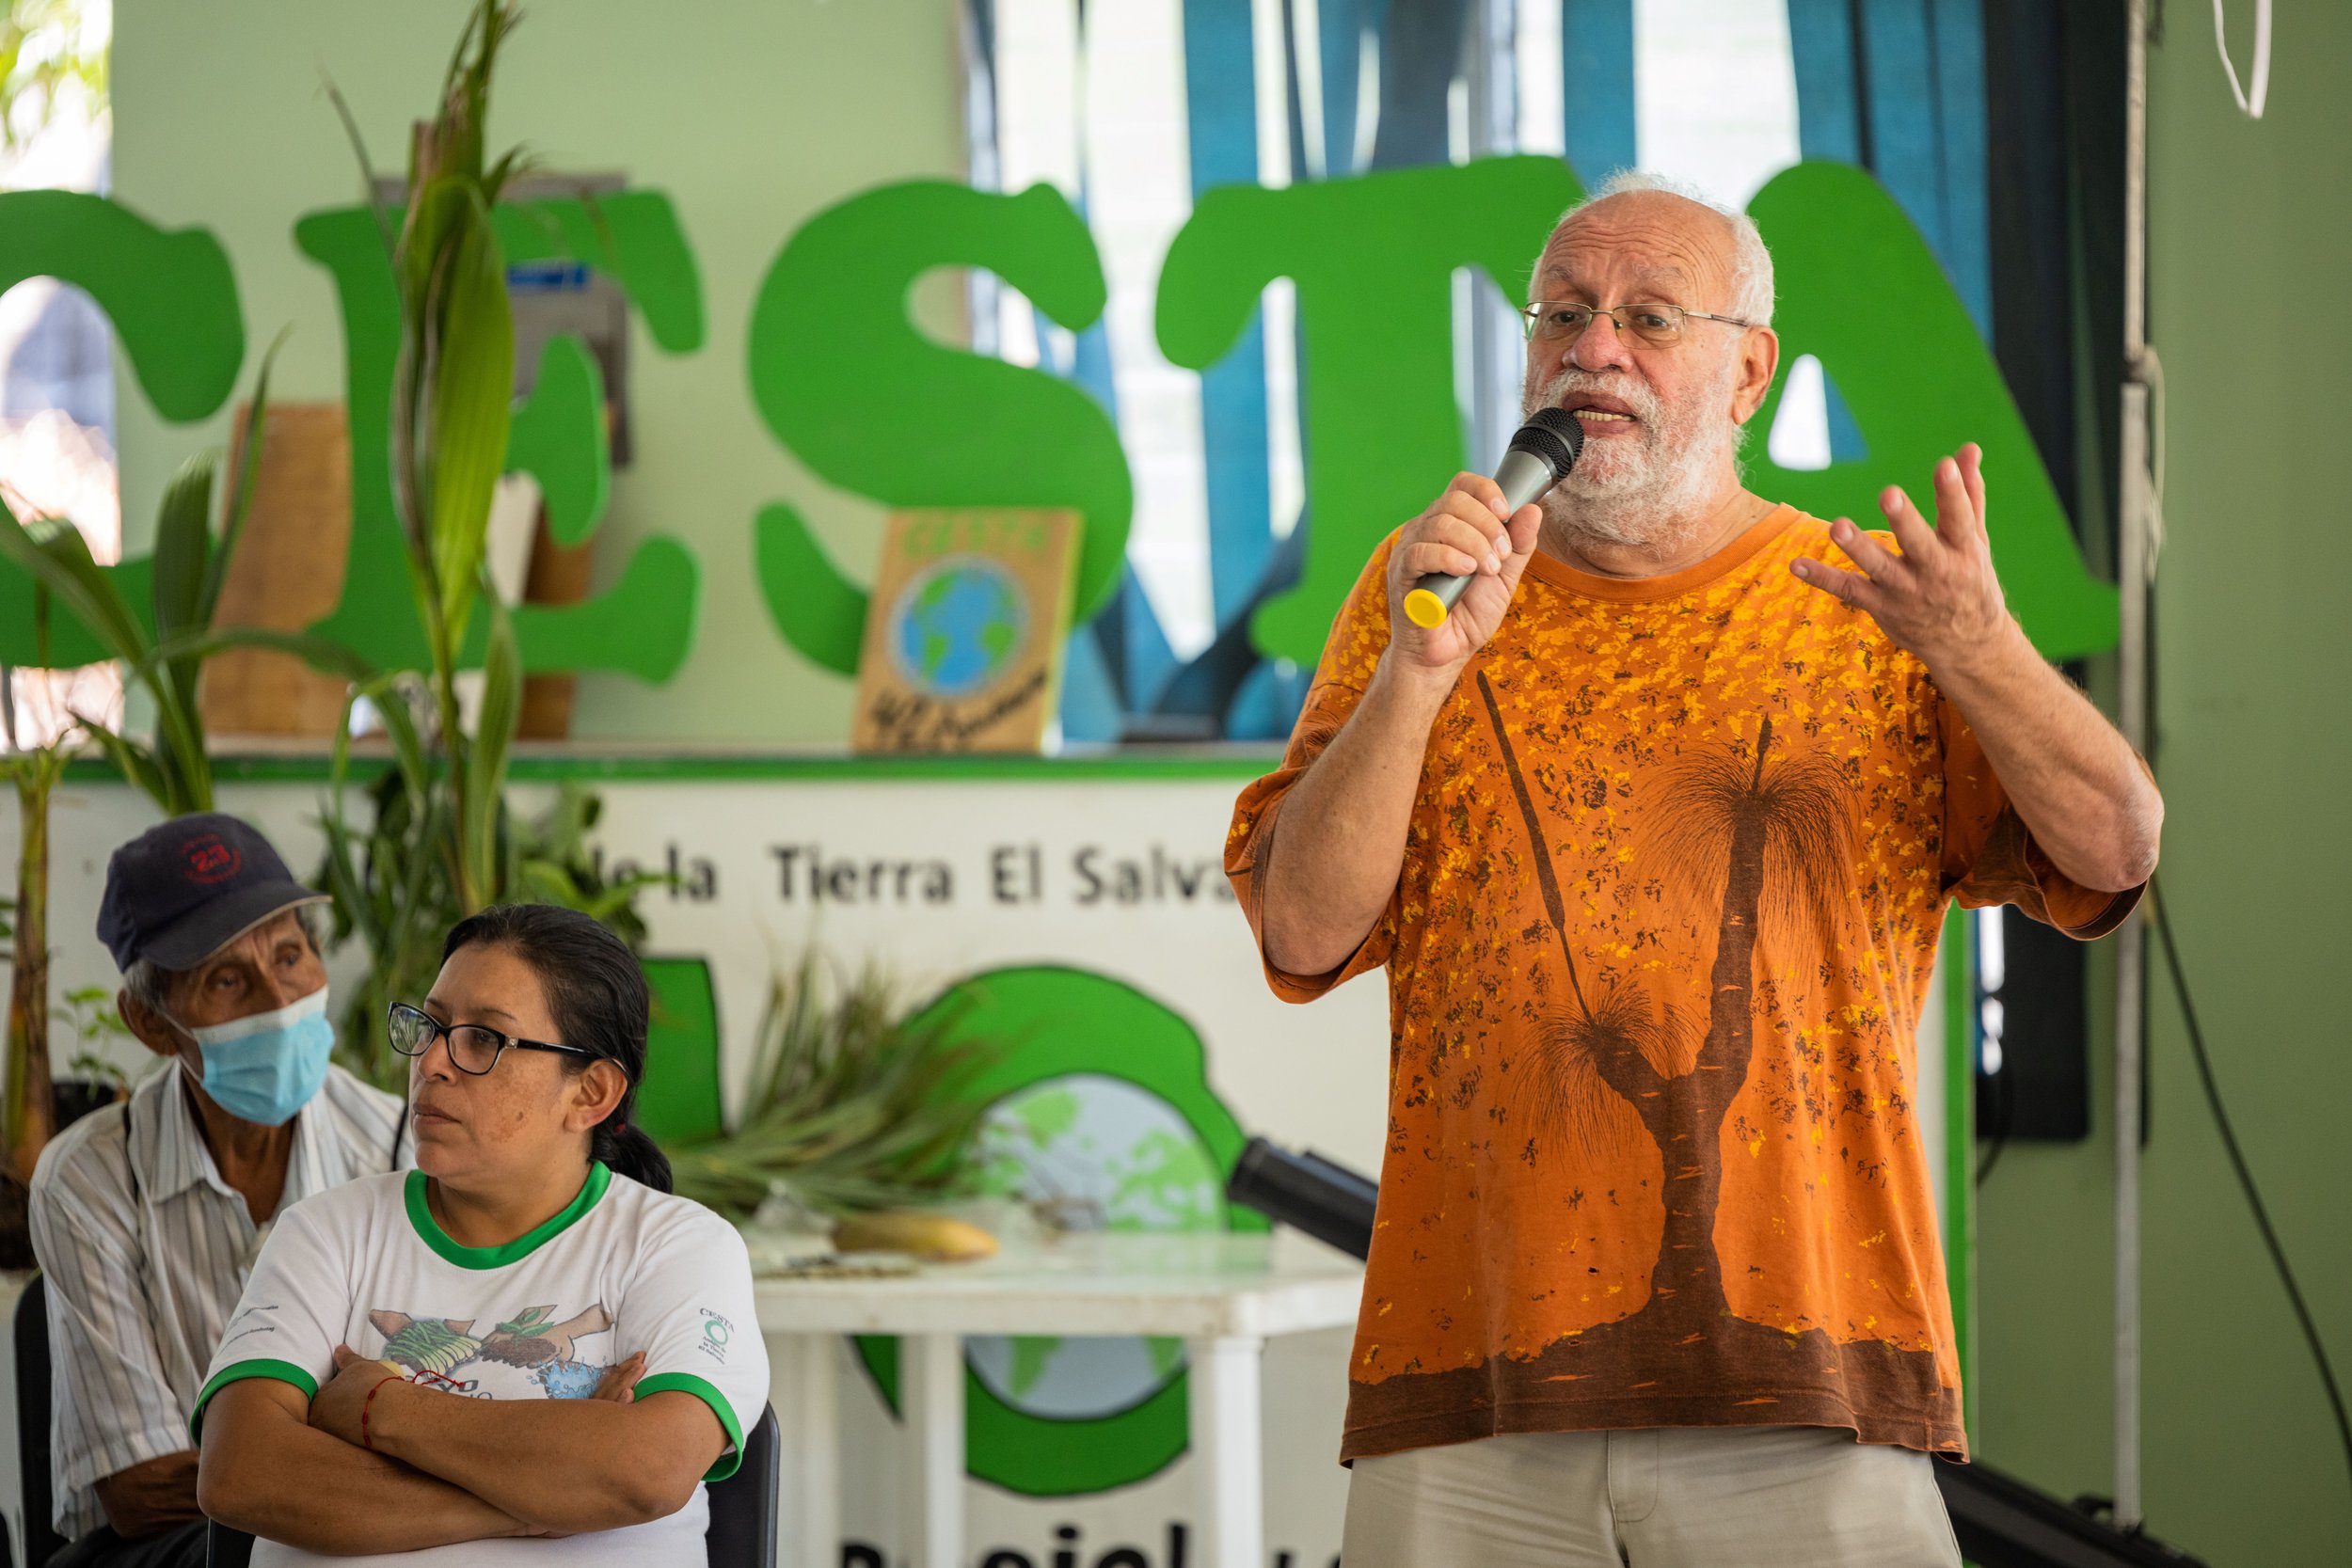 CESTA founder and director Ricardo Navarro addressing the audience at a seed exchange event.